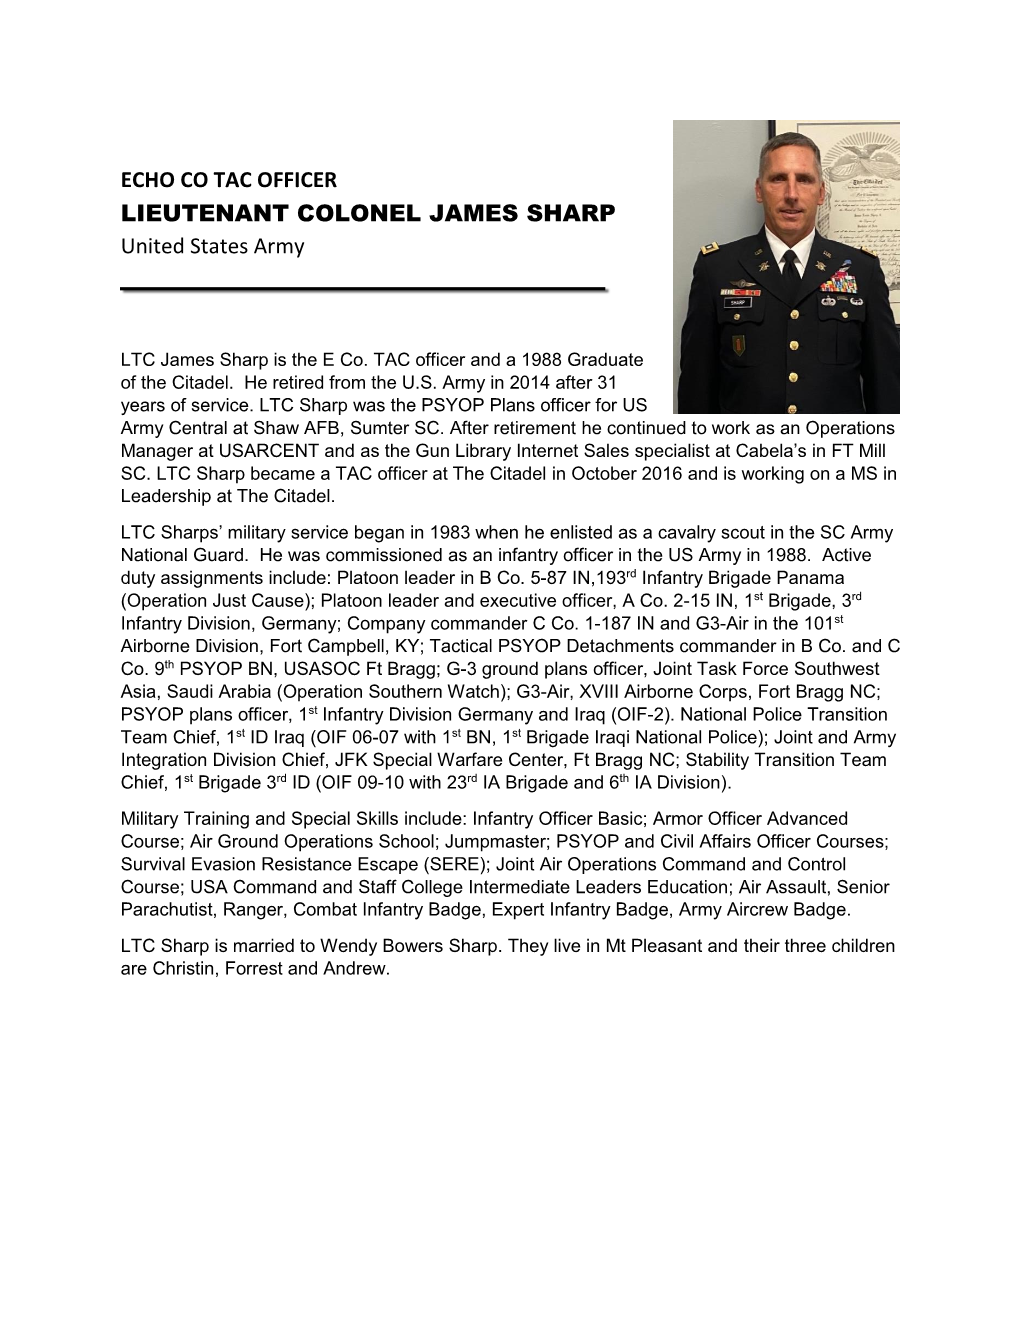 LTC Sharp Was the PSYOP Plans Officer for US Army Central at Shaw AFB, Sumter SC